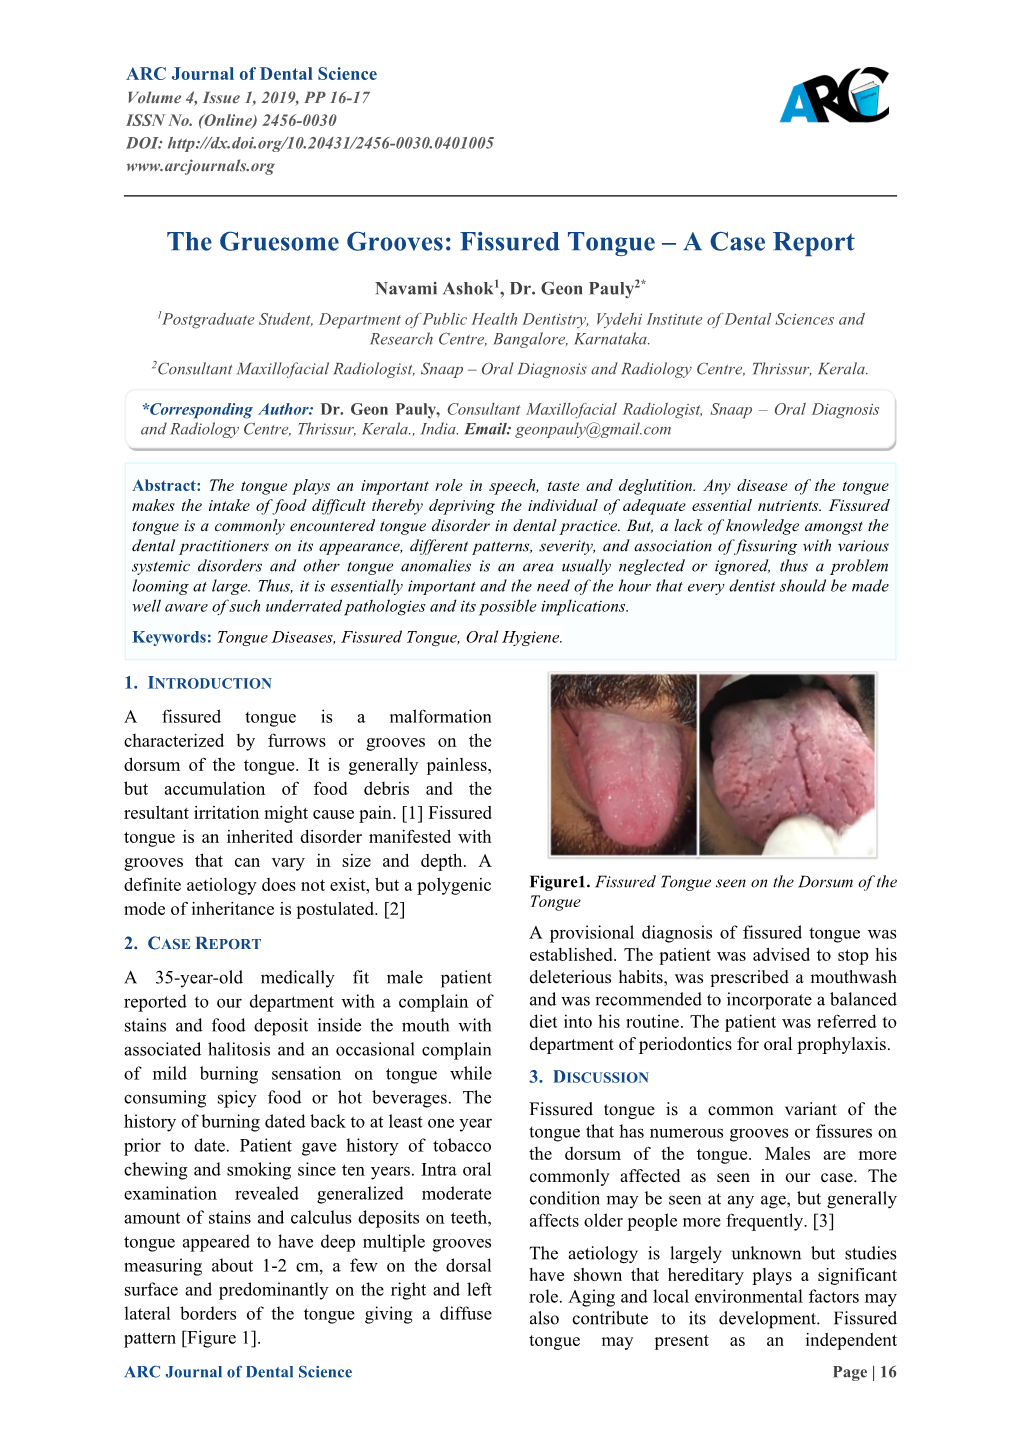 Fissured Tongue – a Case Report